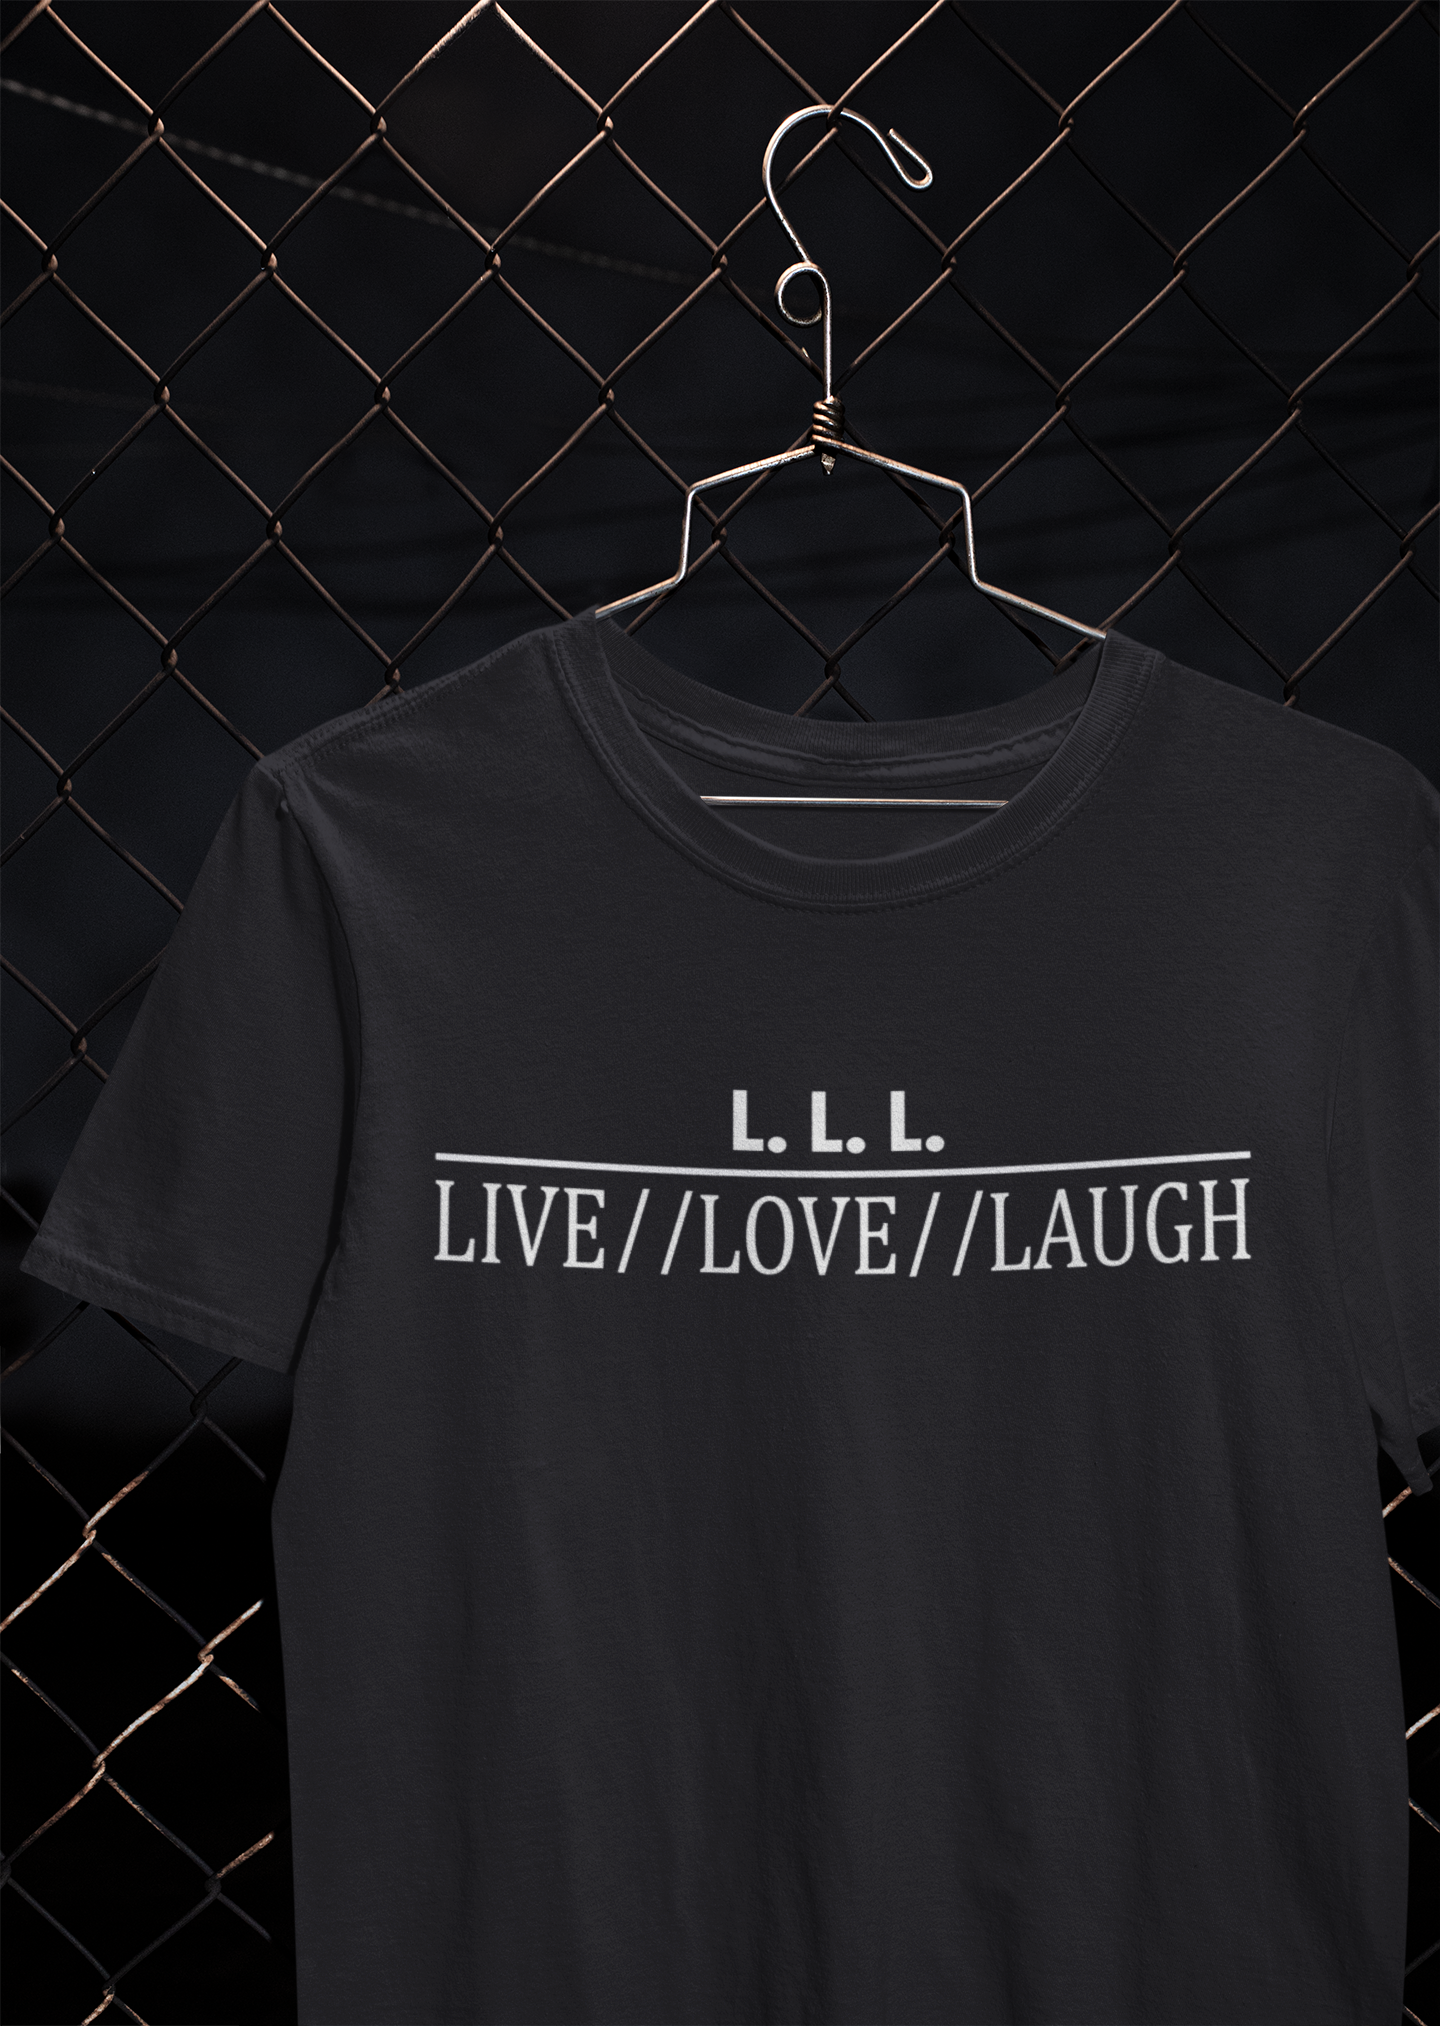 Buy Live Love Laugh Crop Top T-shirt Online in India @ Rs.349